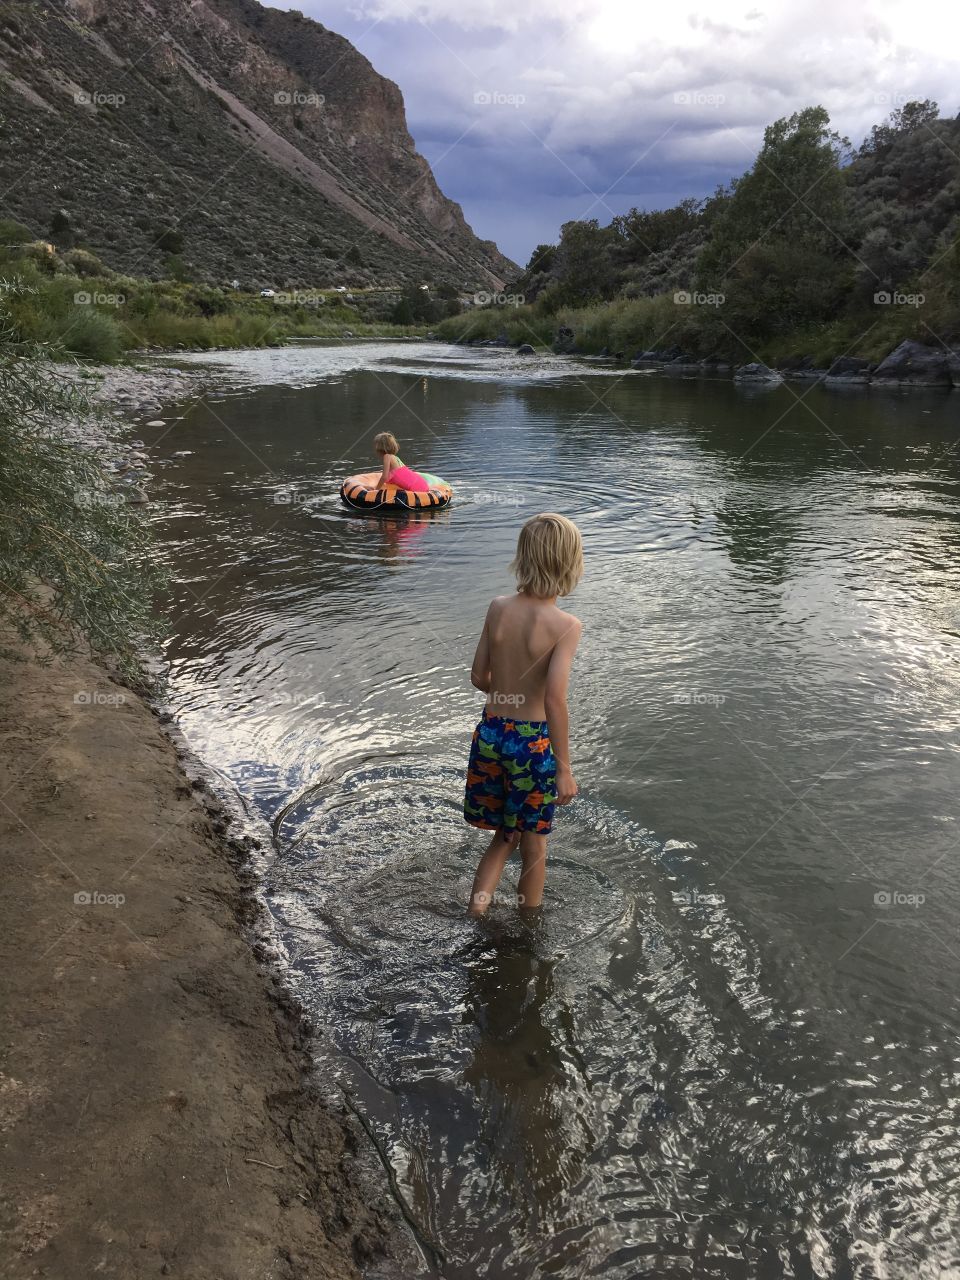 Children venturing out into the river to enjoy floating in a tube along the lazy current.